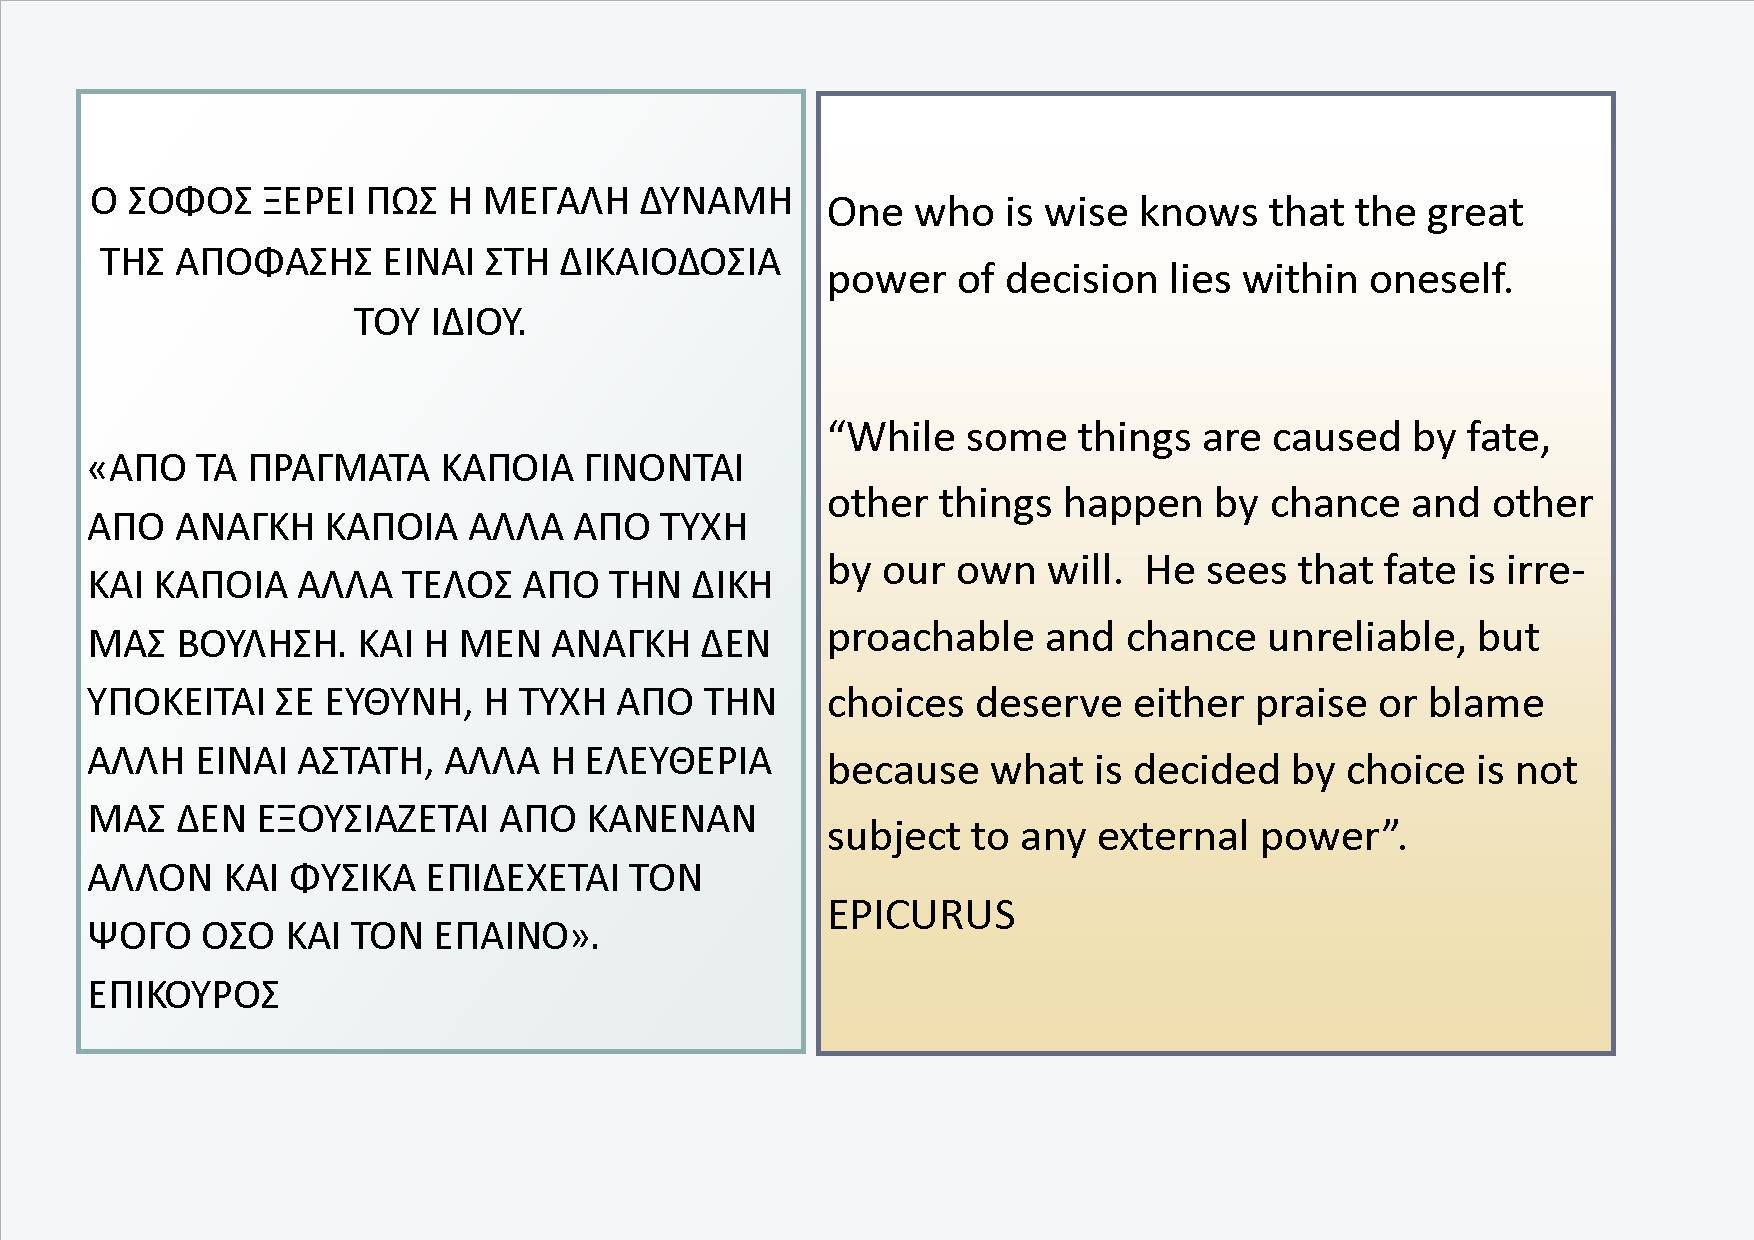 Epicurus On The Power of Decision